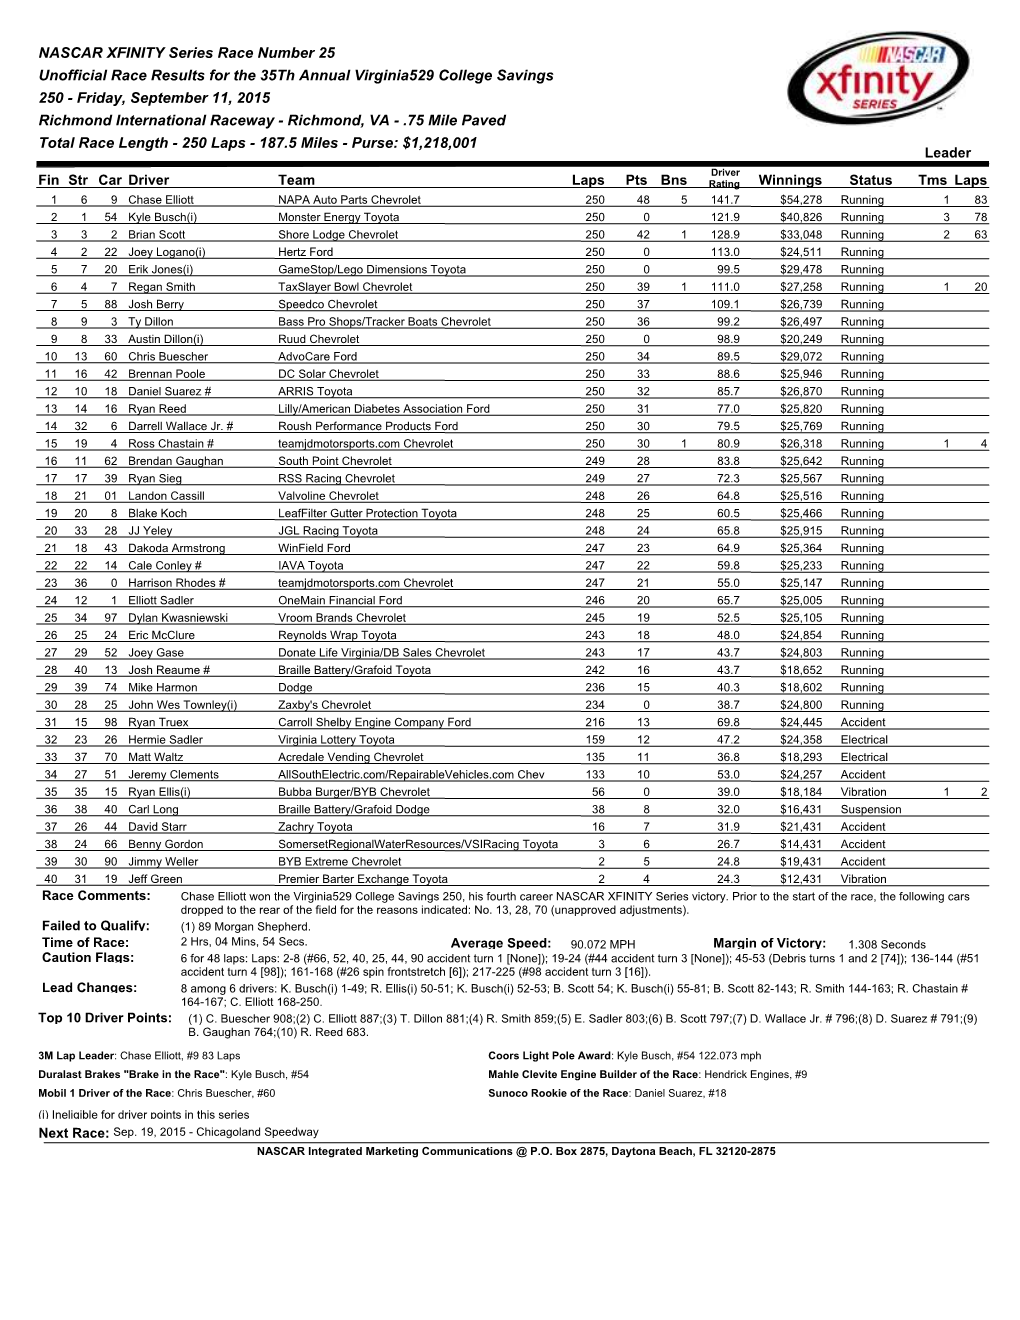 NASCAR XFINITY Series Race Number 25 Unofficial